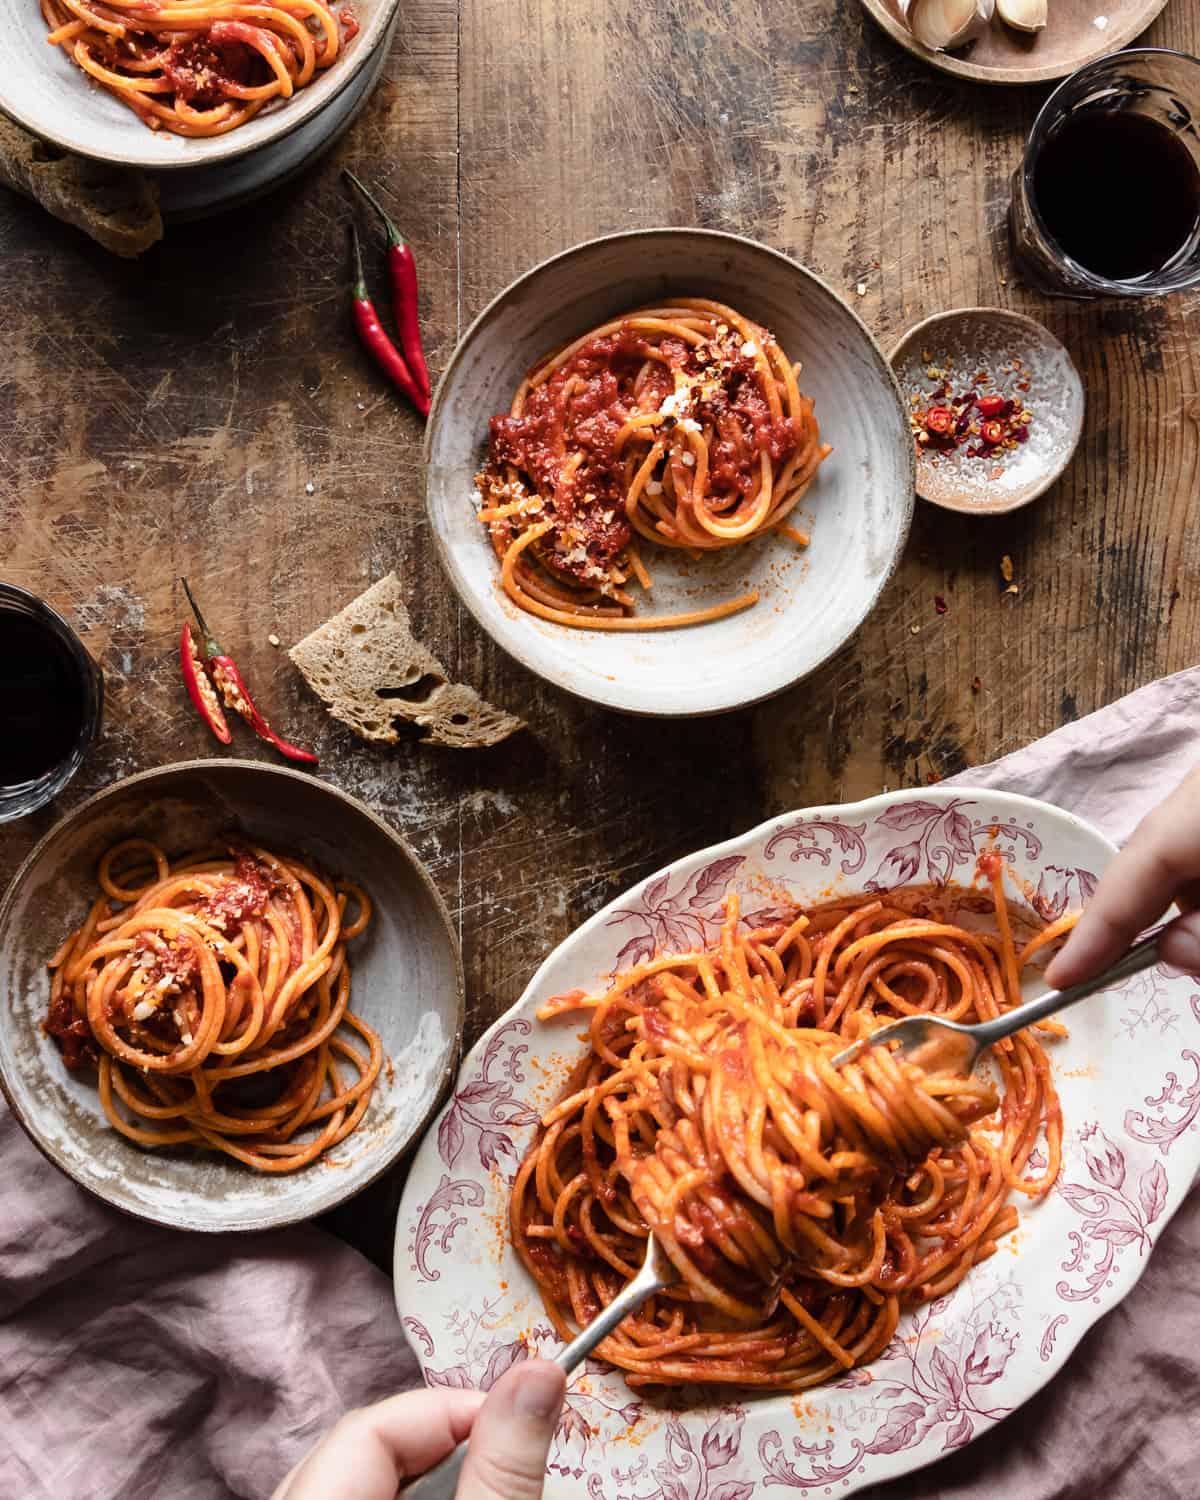 Spaghetti arrabiata on bowls on a wooden table with red chili peppers on top